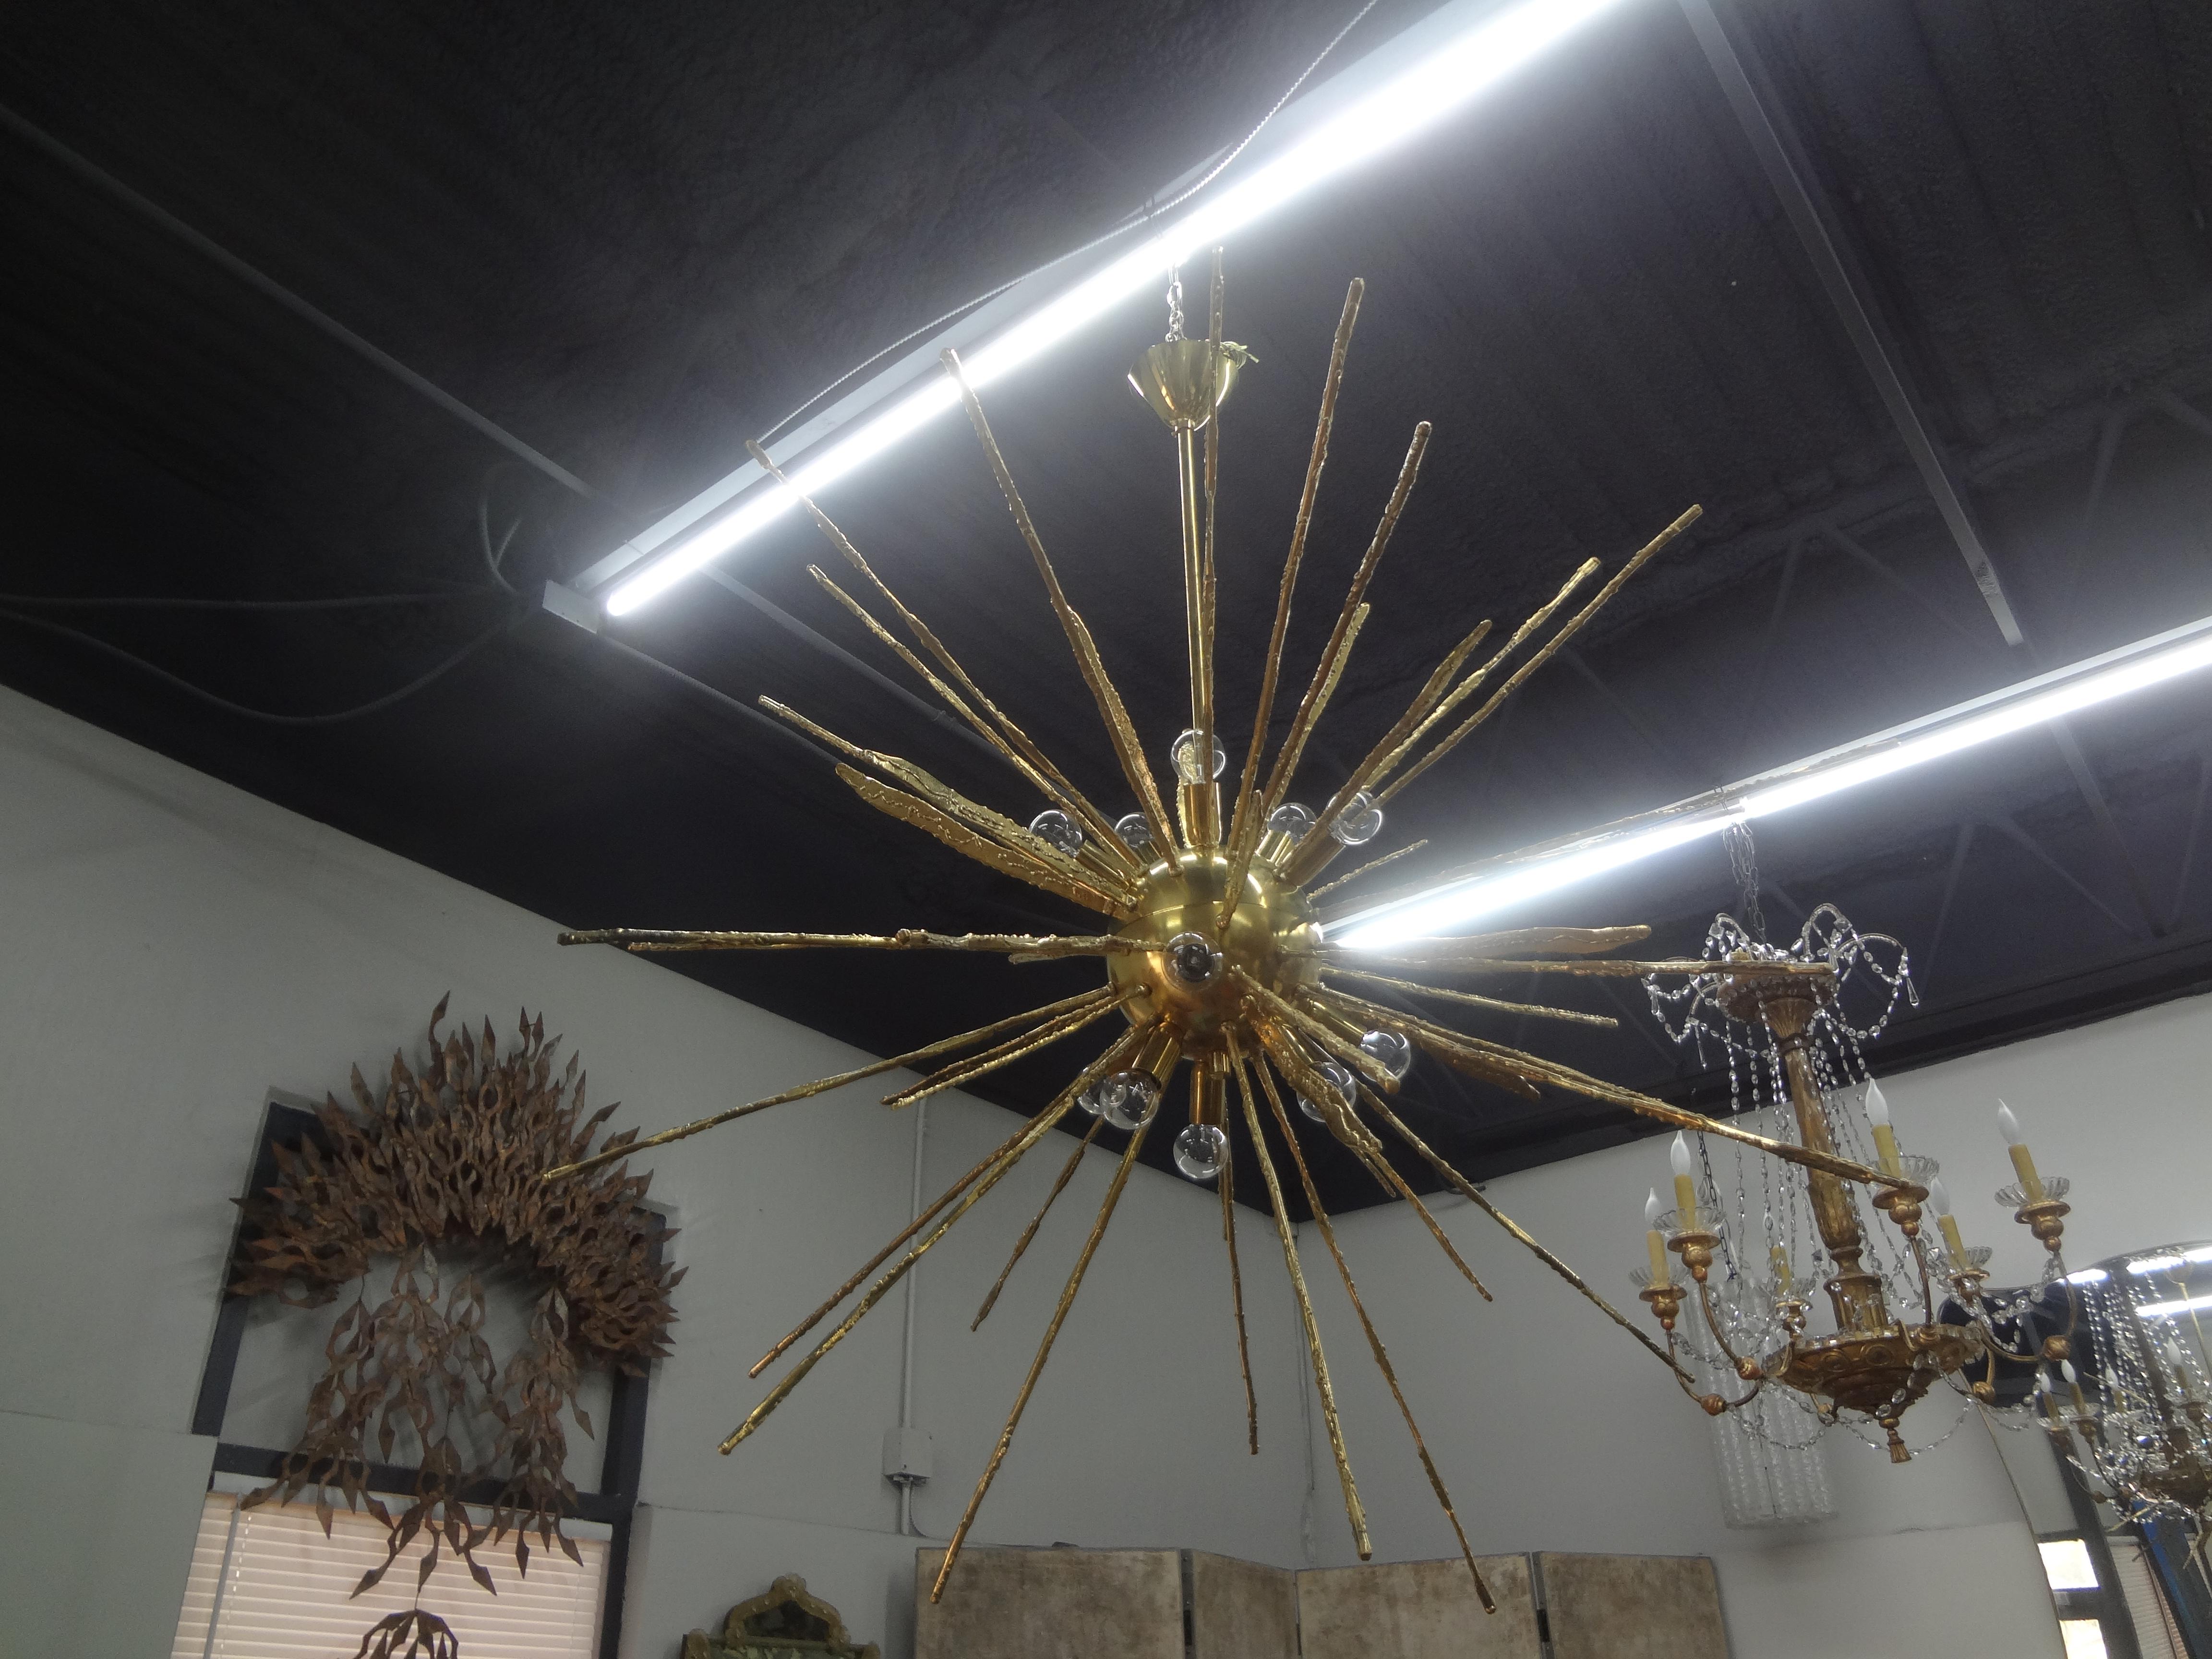 Monumental Pair Of Italian Modern Hammered Brass Sputnik Chandeliers.
This outstanding pair of Italian hand-hammered brass Sputnik or sea urchin chandeliers are newly wired with new sockets for the U.S. market. Beautifully executed in alternating